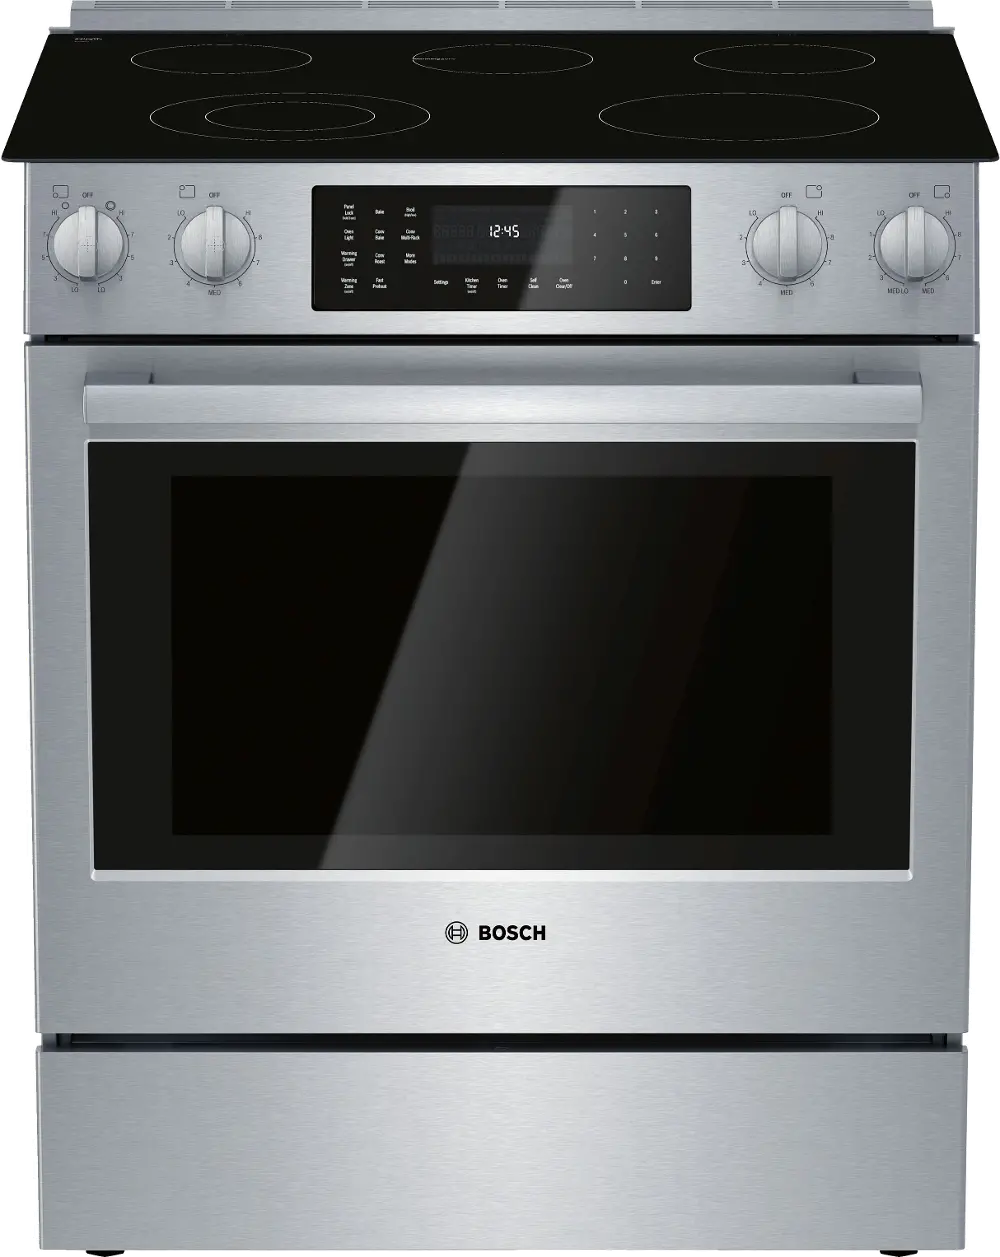 HEI8056U Bosch 4.6 cu. ft. Electric Convection Slide In Range - 30 Inch Stainless Steel-1